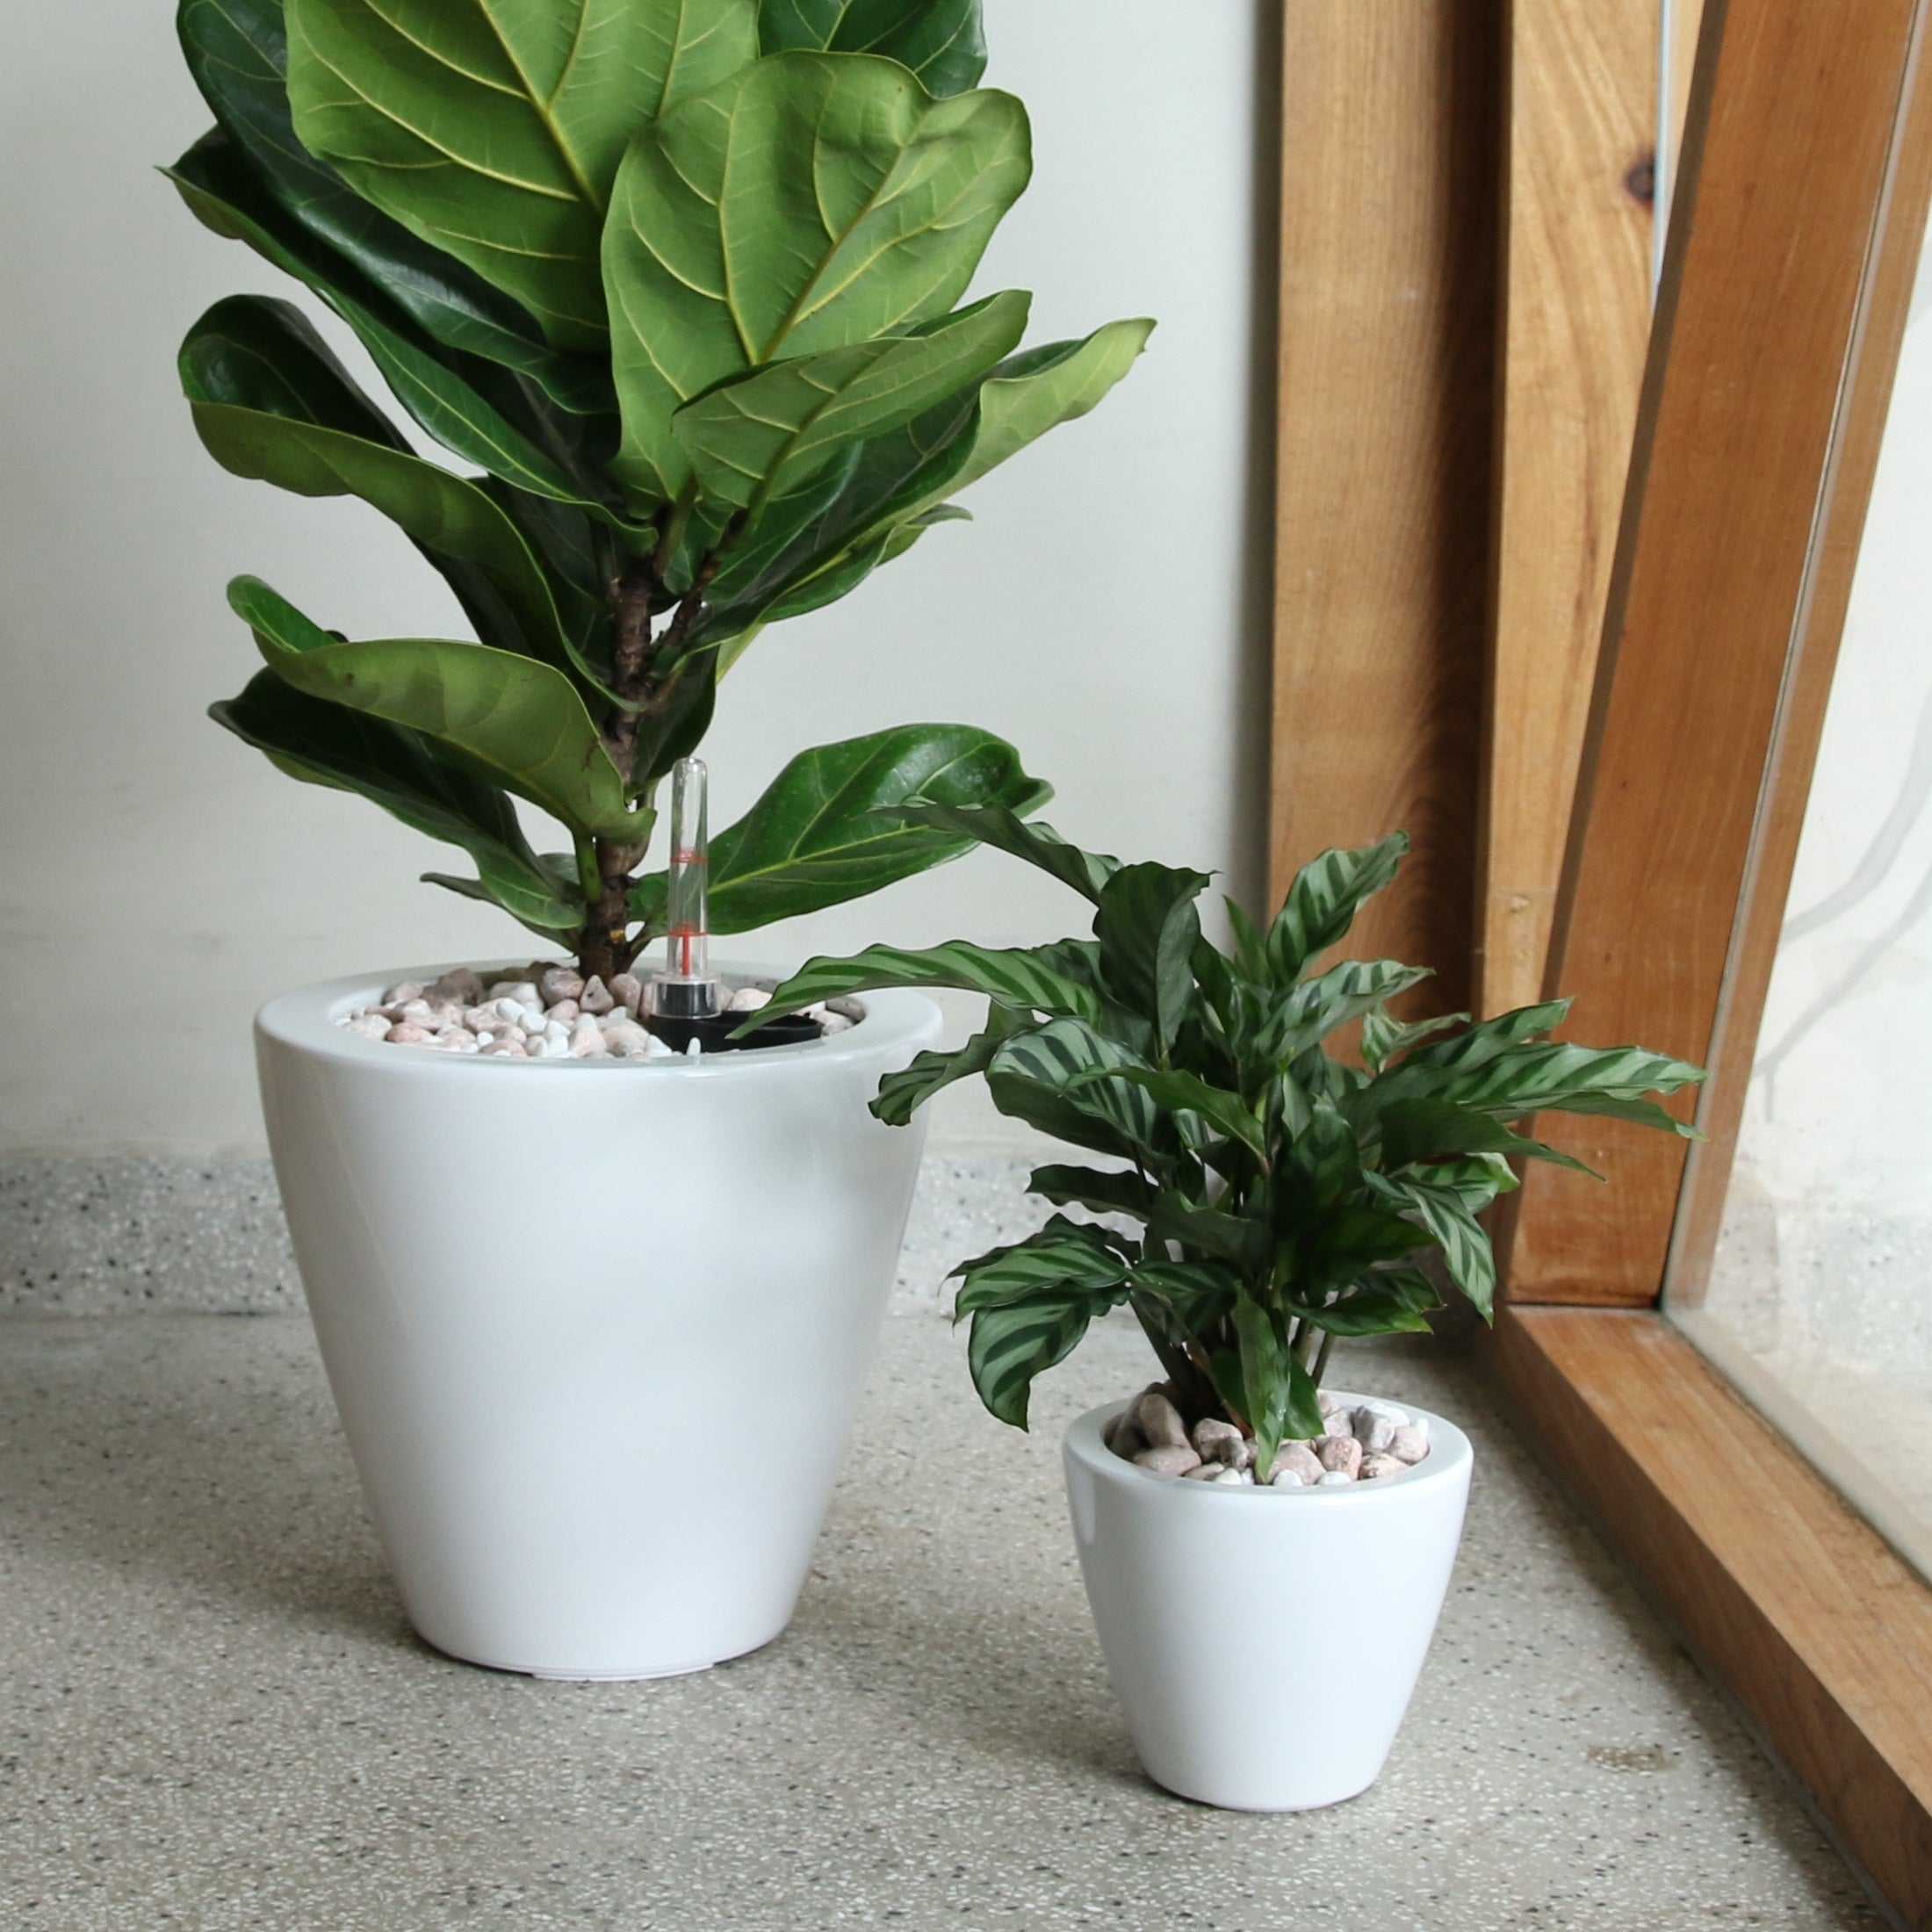 2-Pack-Smart-Self-watering-Planter-Pot-for-Indoor-and-Outdoor-White-Round-Cone-Pots-&-Planters